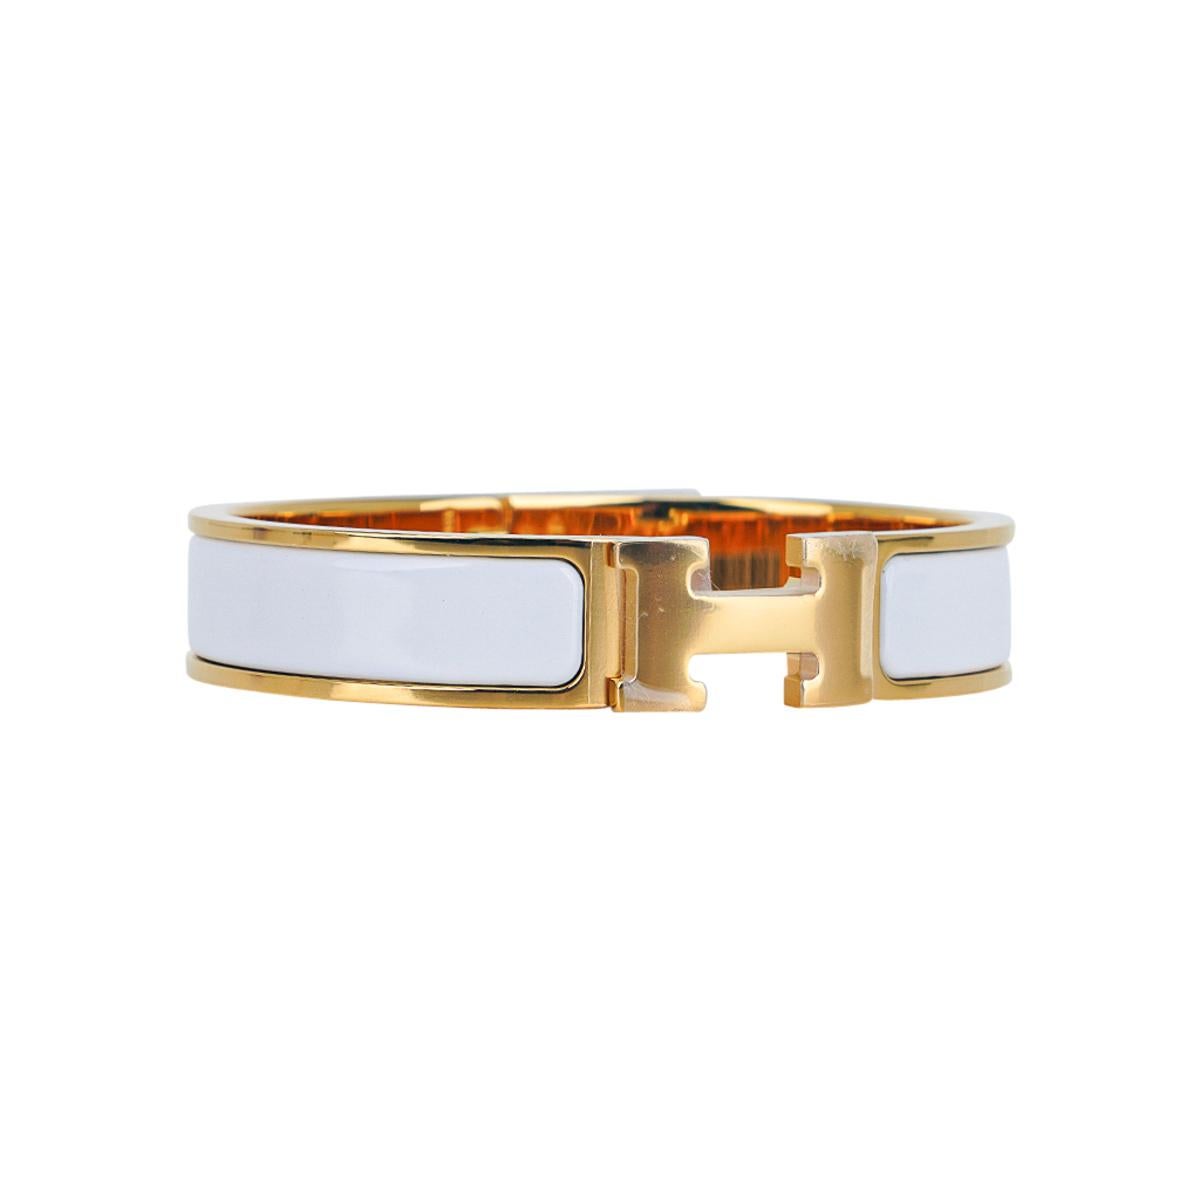 Mightychic offers an Hermes Clic H Bracelet featured in white Enamel.
Set in Gold plated hardware.
Chic, modern and unmistakably Hermes!
A hinged band allows the H to swivel and open the bracelet.
Comes with pouch and signature Hermes box.
NEW or